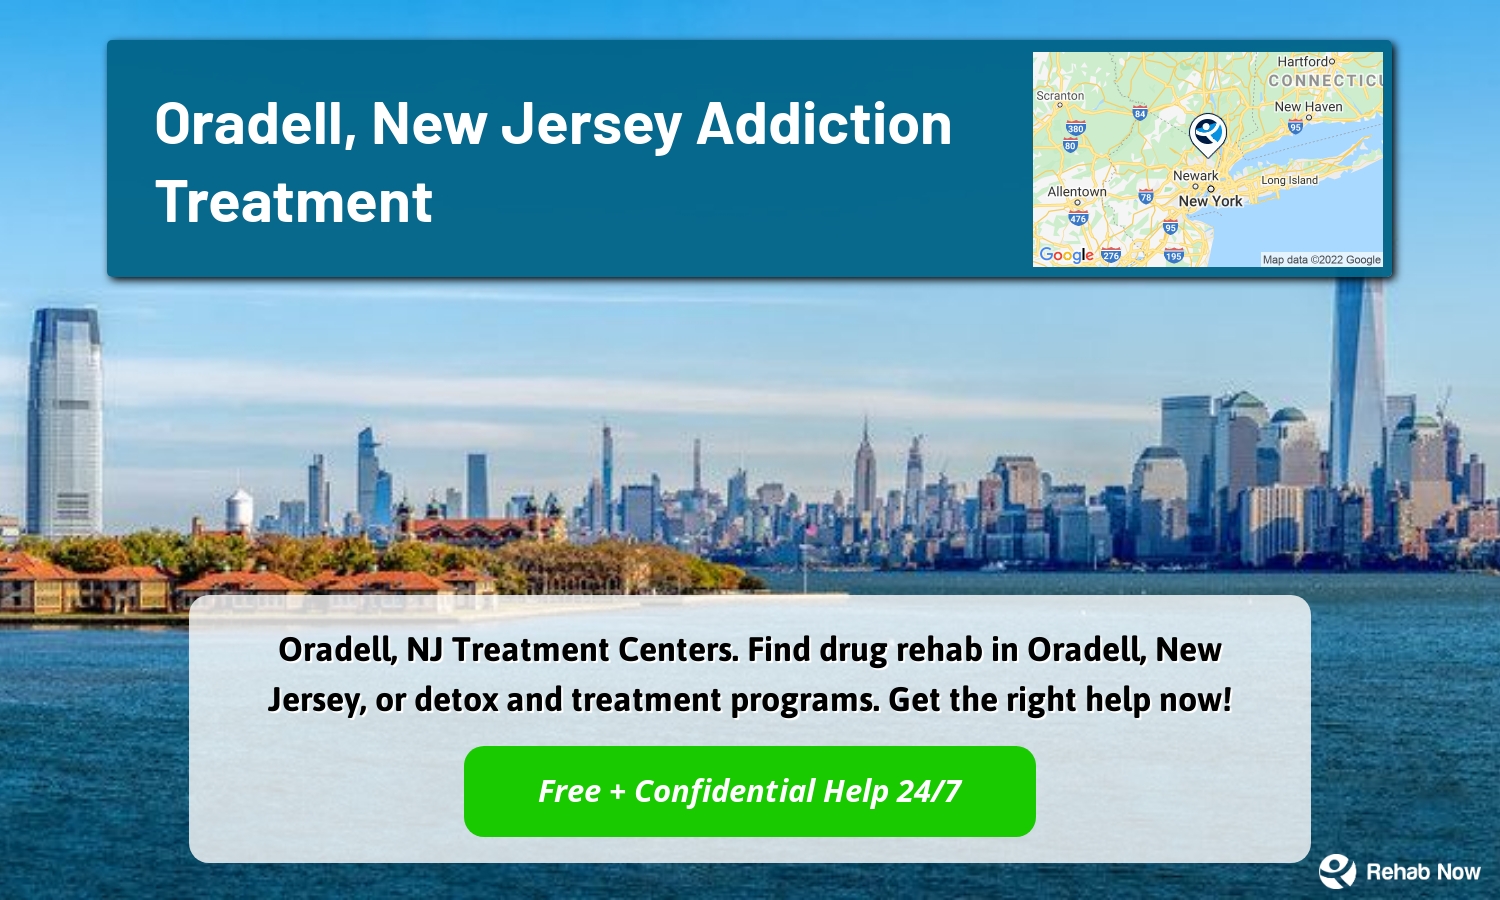 Oradell, NJ Treatment Centers. Find drug rehab in Oradell, New Jersey, or detox and treatment programs. Get the right help now!